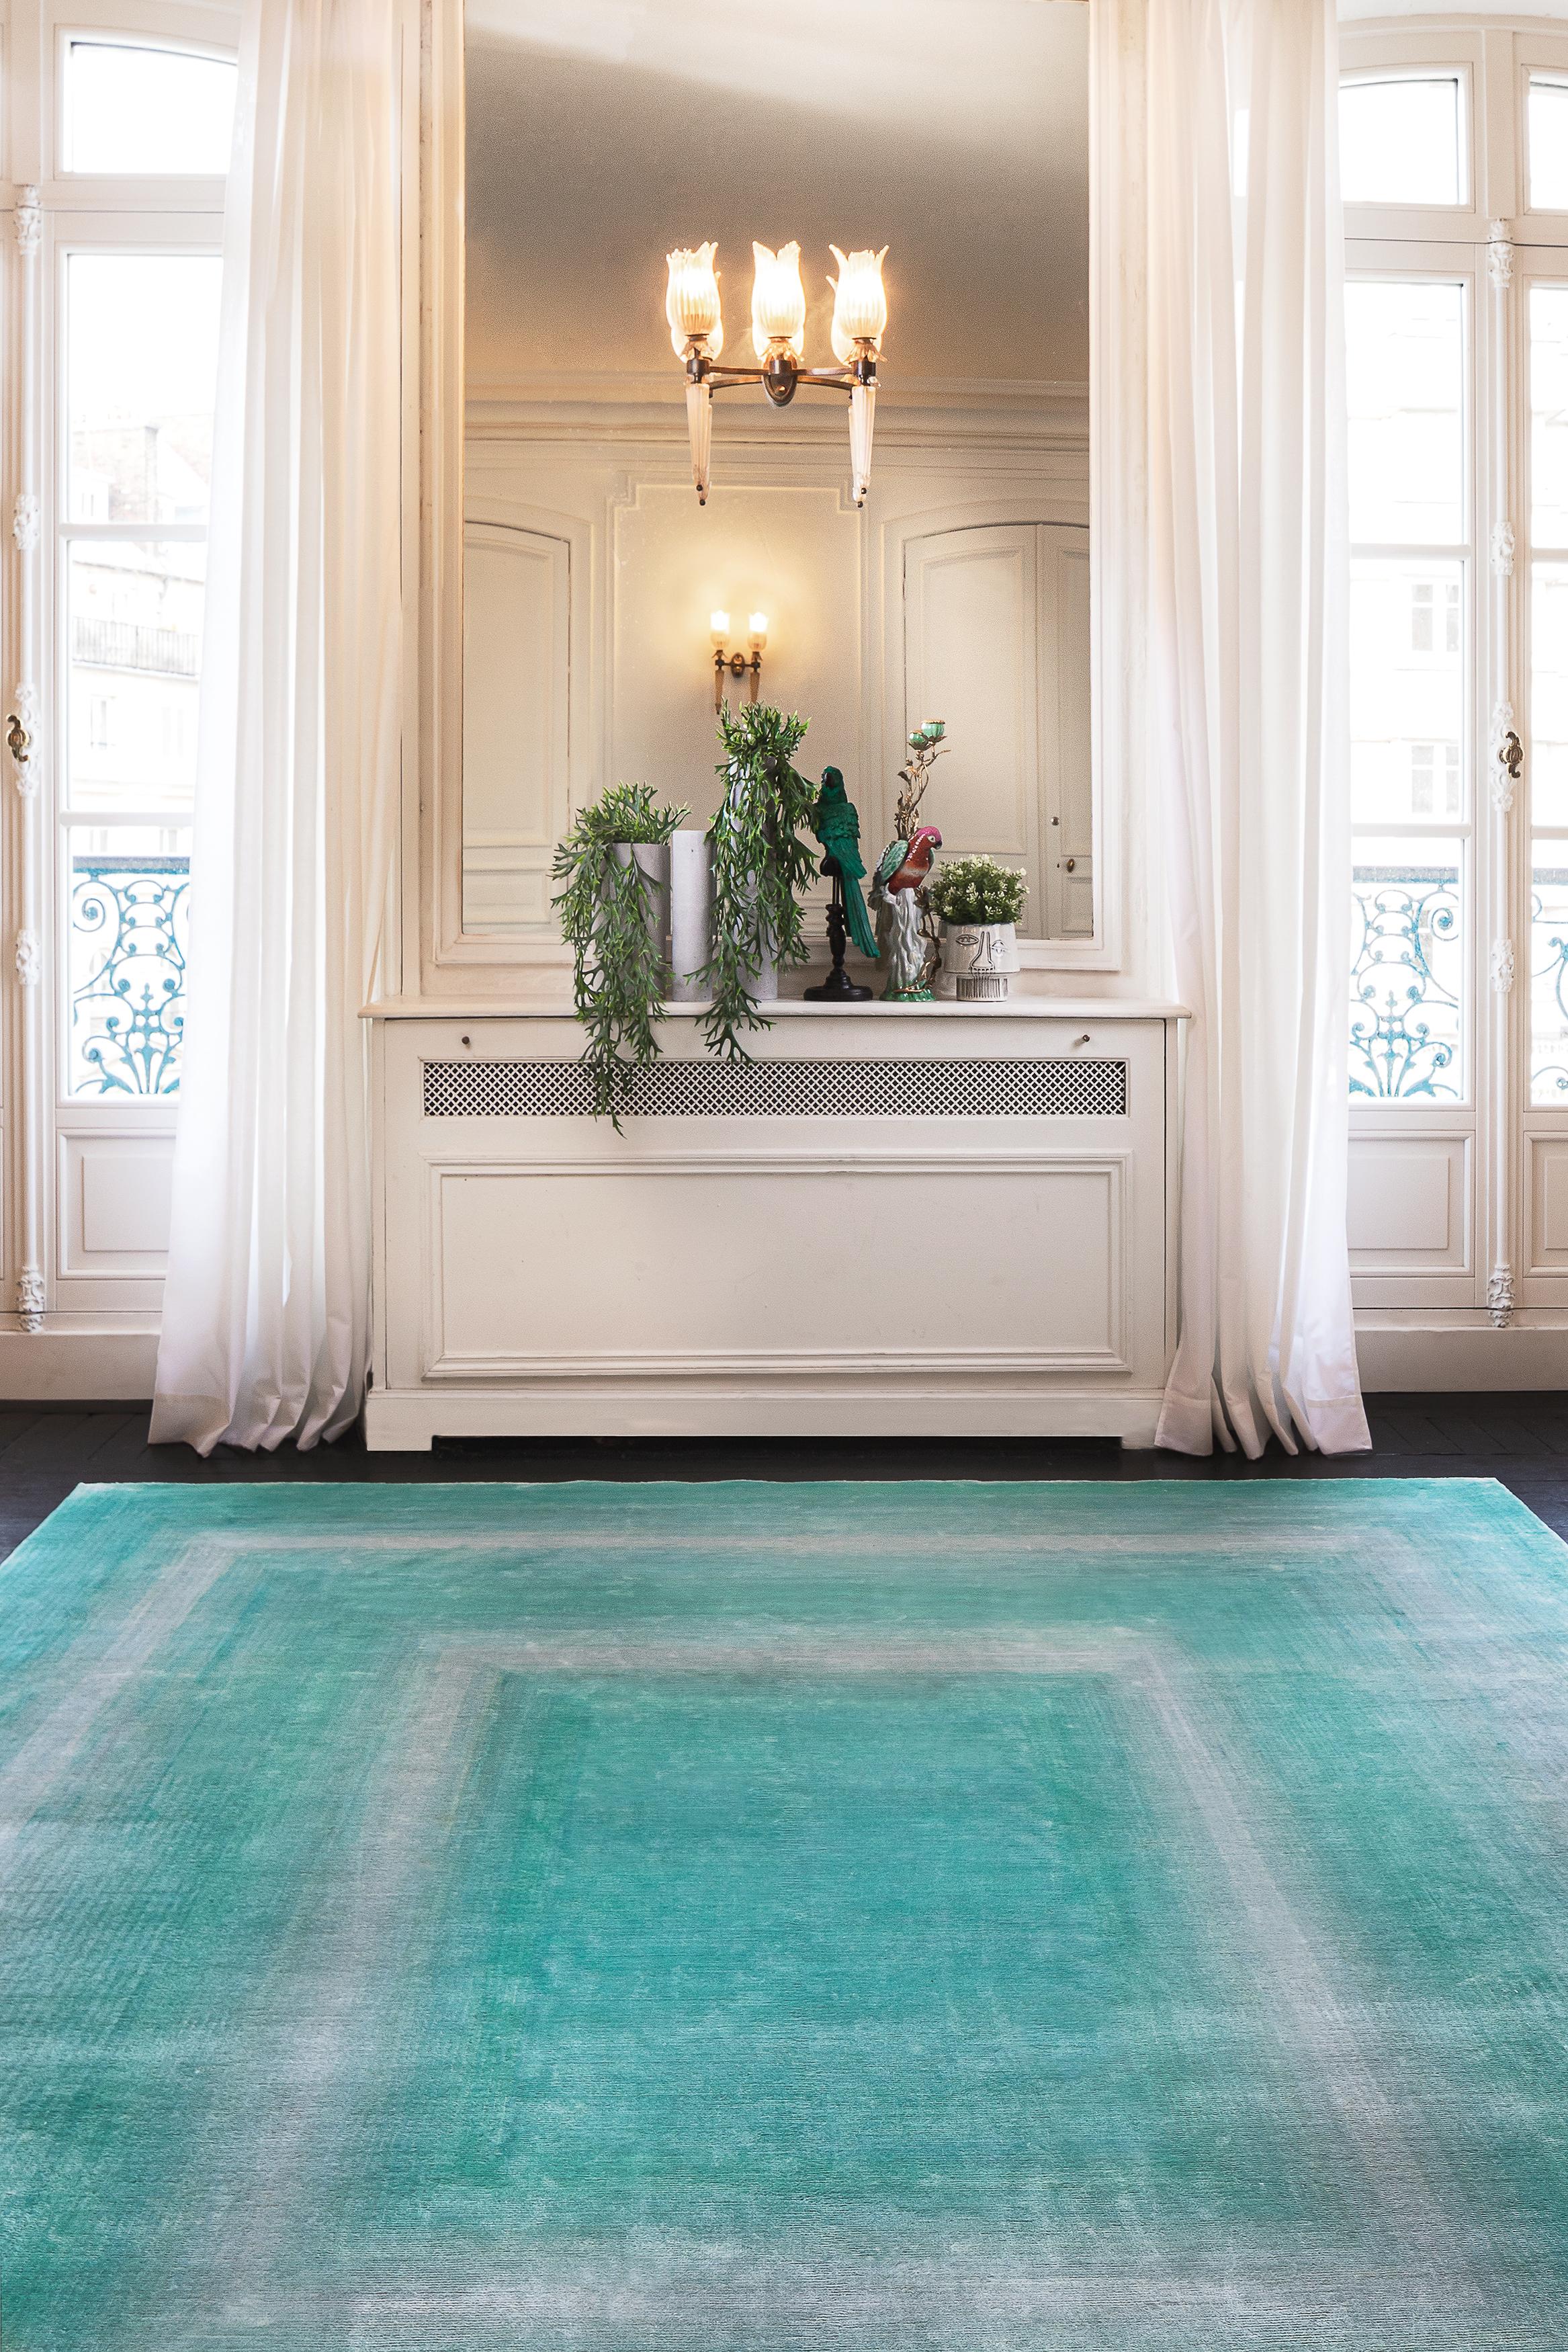 Rainbow Groove Turquoise
Rug from Chromatic Collection of Edition Bougainville
Nepalese hand knotted
All art silk
Size: 250 x 300.

CHROMATIC
The Chromatic collection is a liberal use of both colours and textures following our inspiration. There are